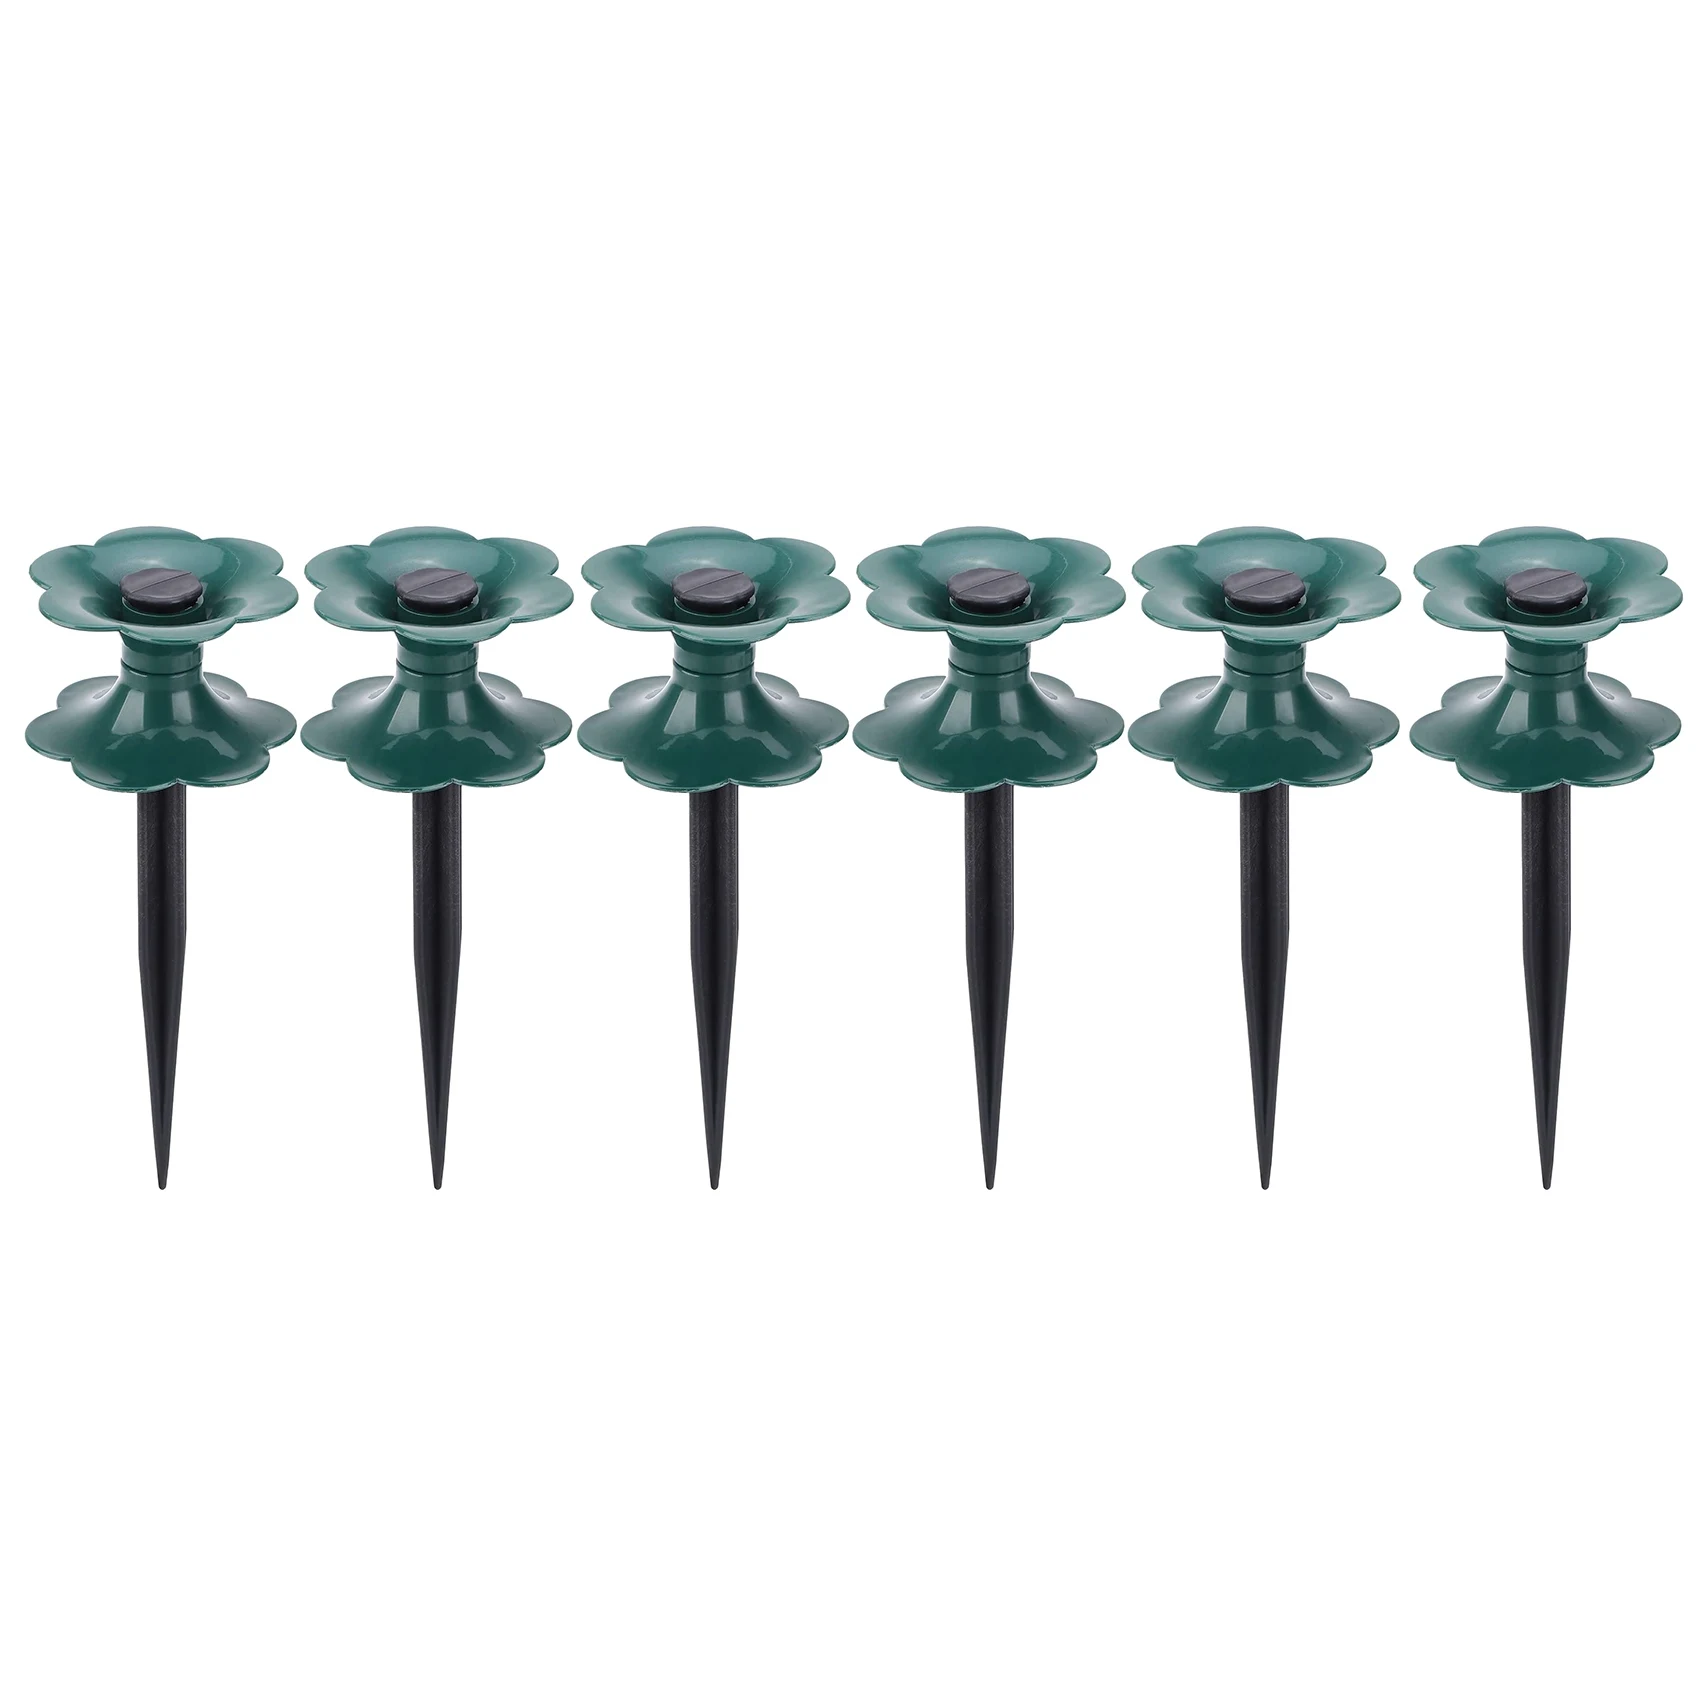 

6 Pack Garden Hose Guide Spike,Duty Dark Green Spin Top, Keeps Garden Hose Out of Flower Beds, for Plant Protection